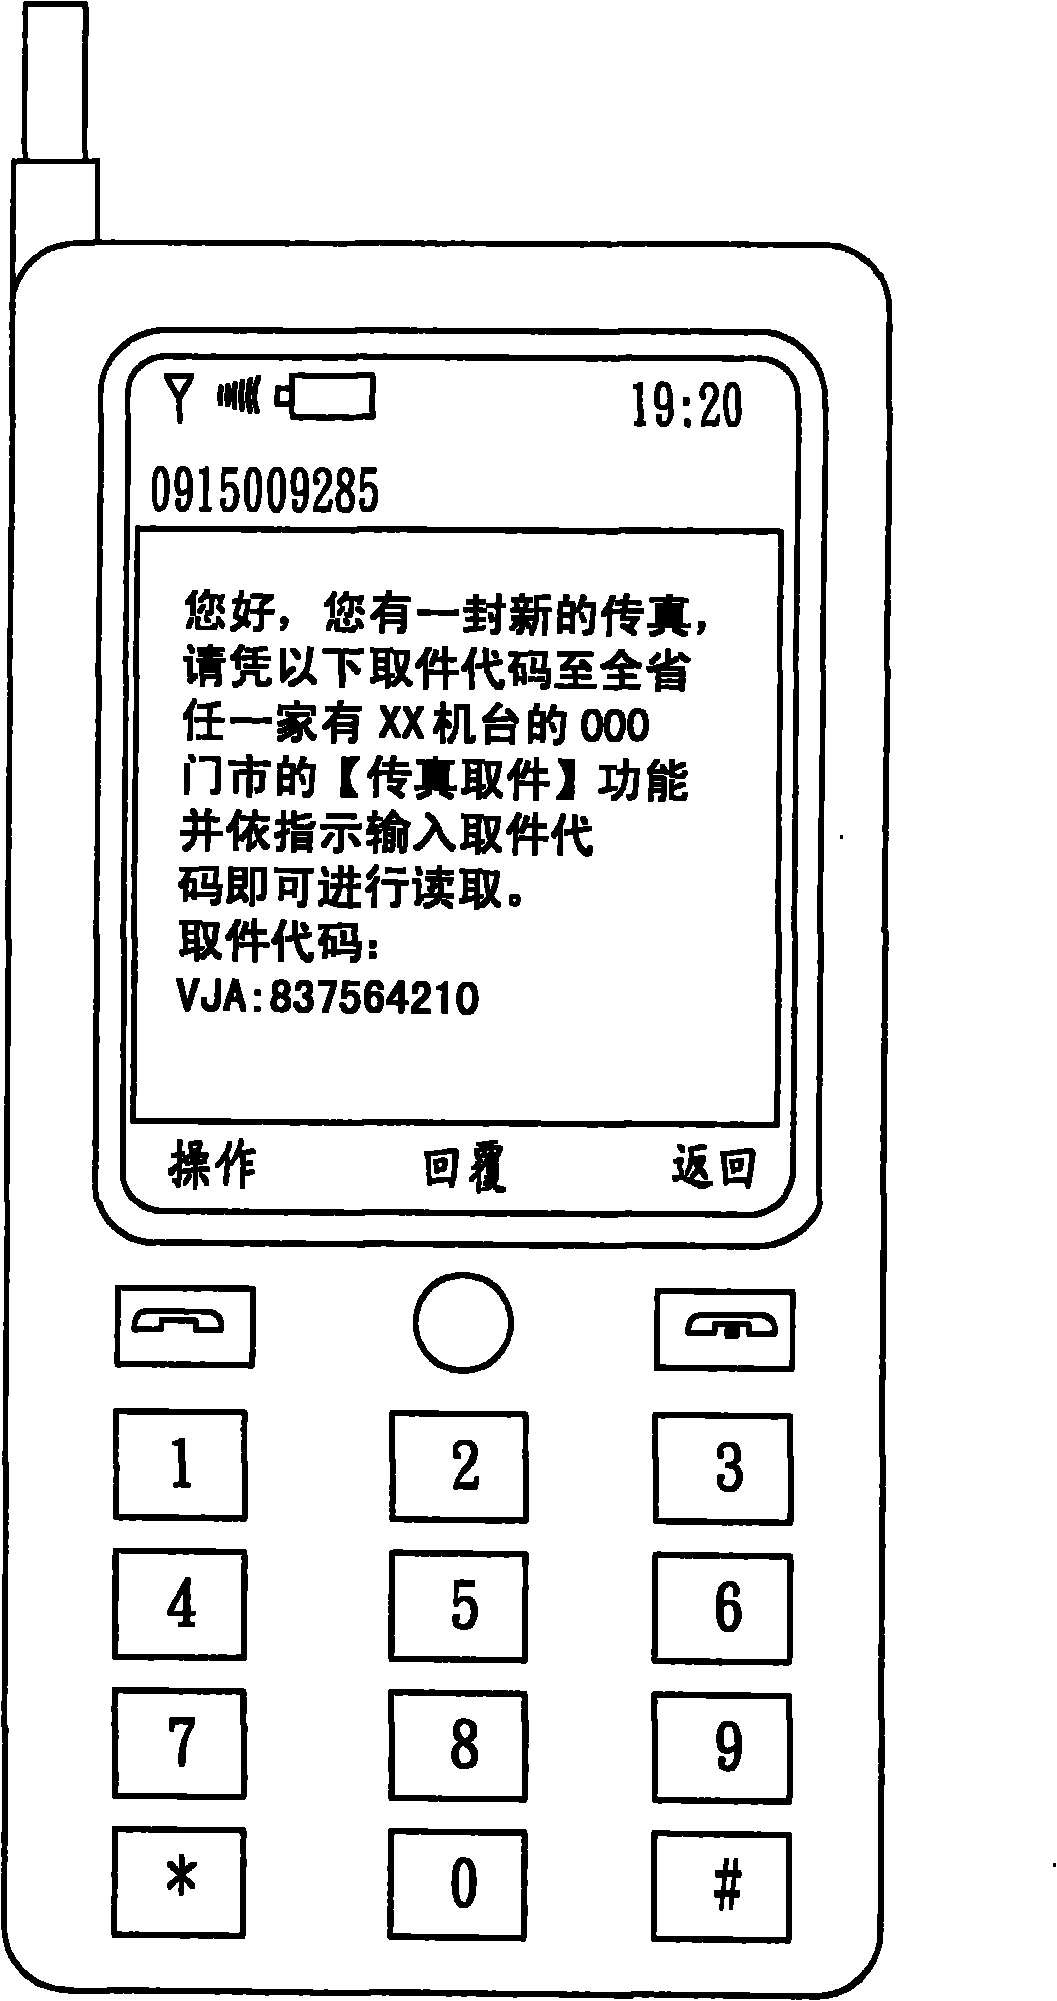 Personal fax receiving system